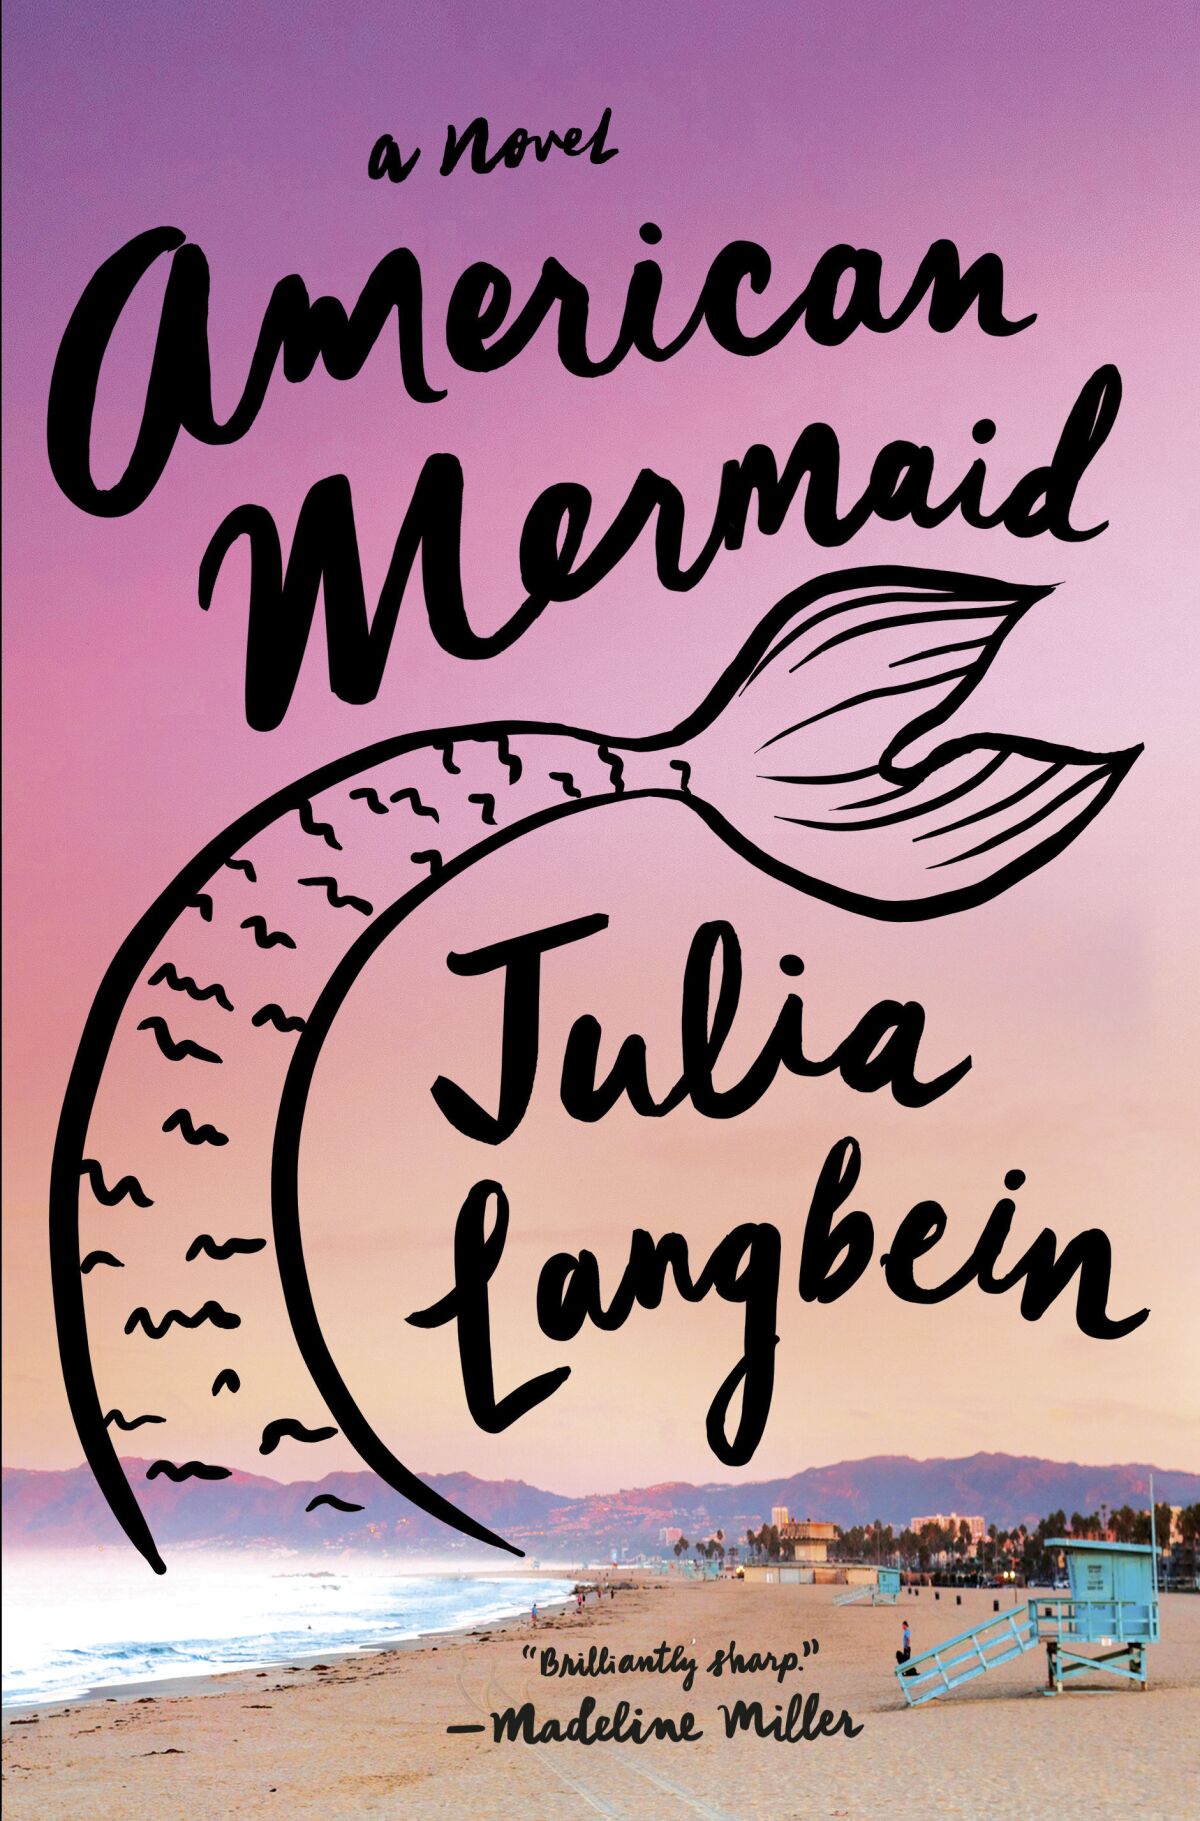 This cover image released by Doubleday shows "American Mermaid" by Julia Langbein. (Doubleday via AP)